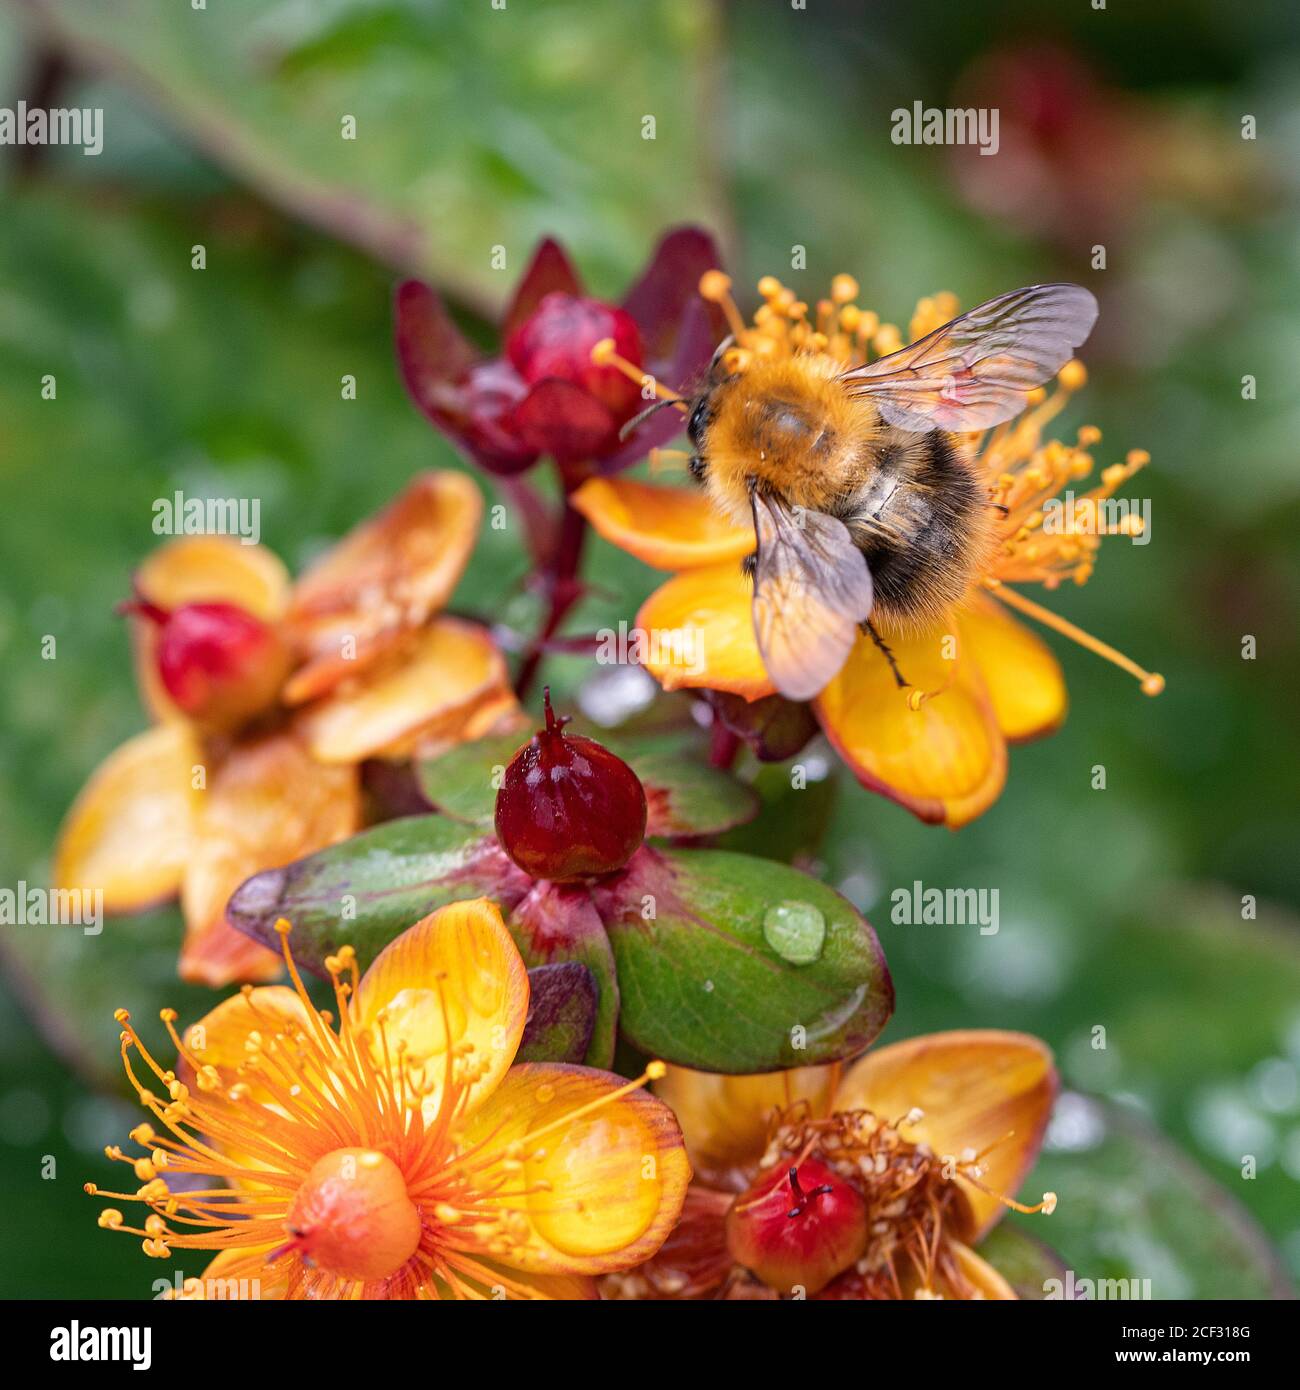 A Carder Bumblebee Feeding on Yellow and Red Hypericum Flowers Albury Purple in a Garden in Alsager Cheshire England United Kingdom UK Stock Photo